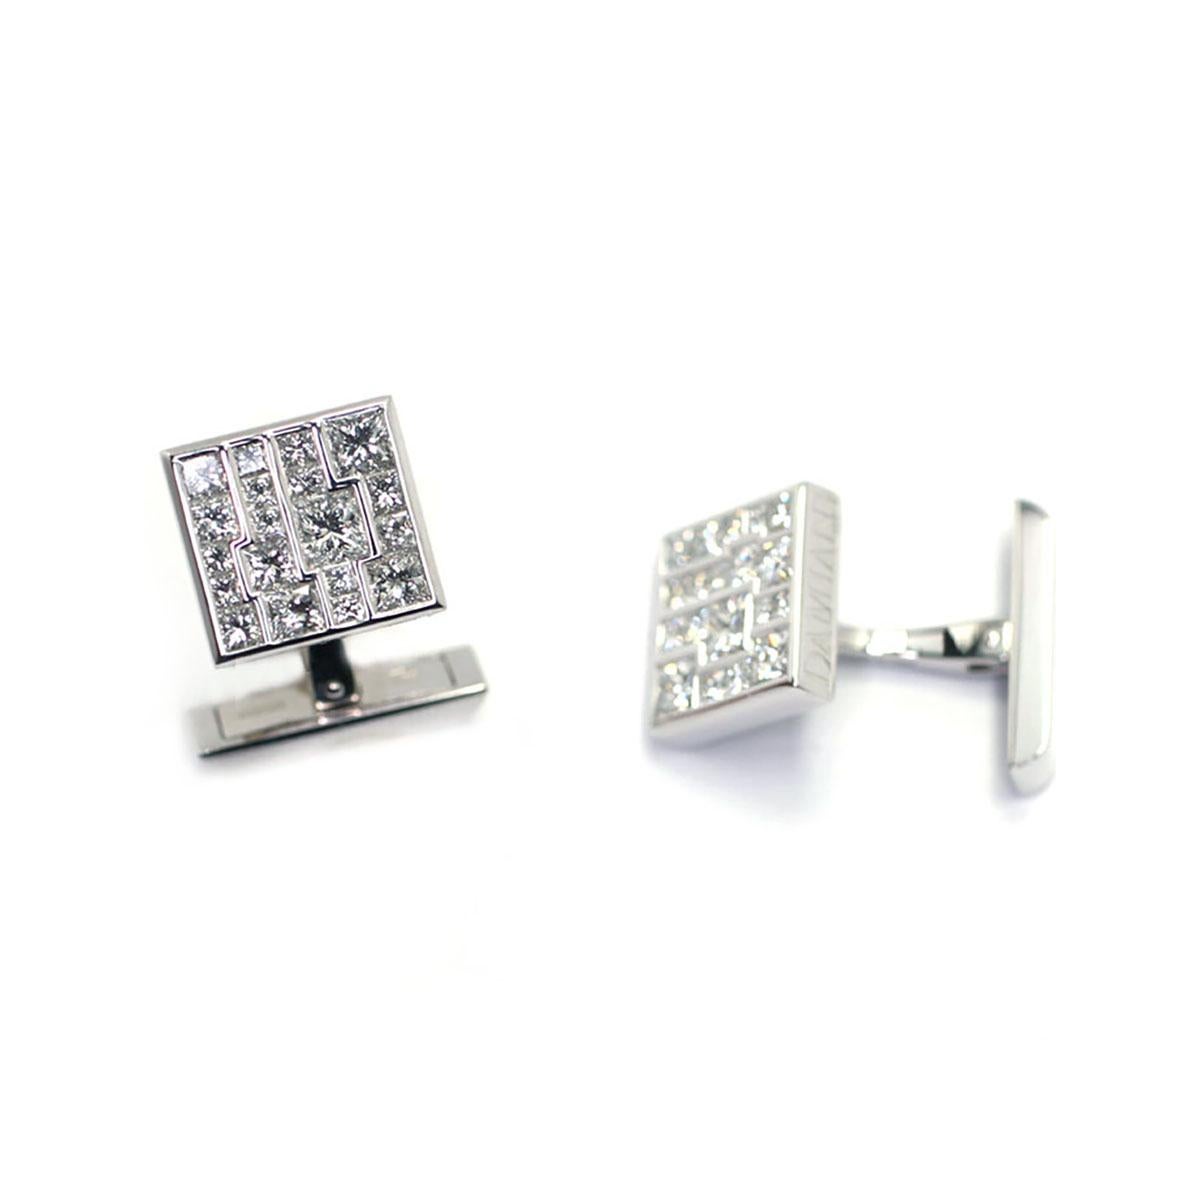 Diamond Cufflinks by Damiani.
Metal: white gold 18K.
Diamonds: 3.65 carats color H.
Total weight: 13.60 grams.